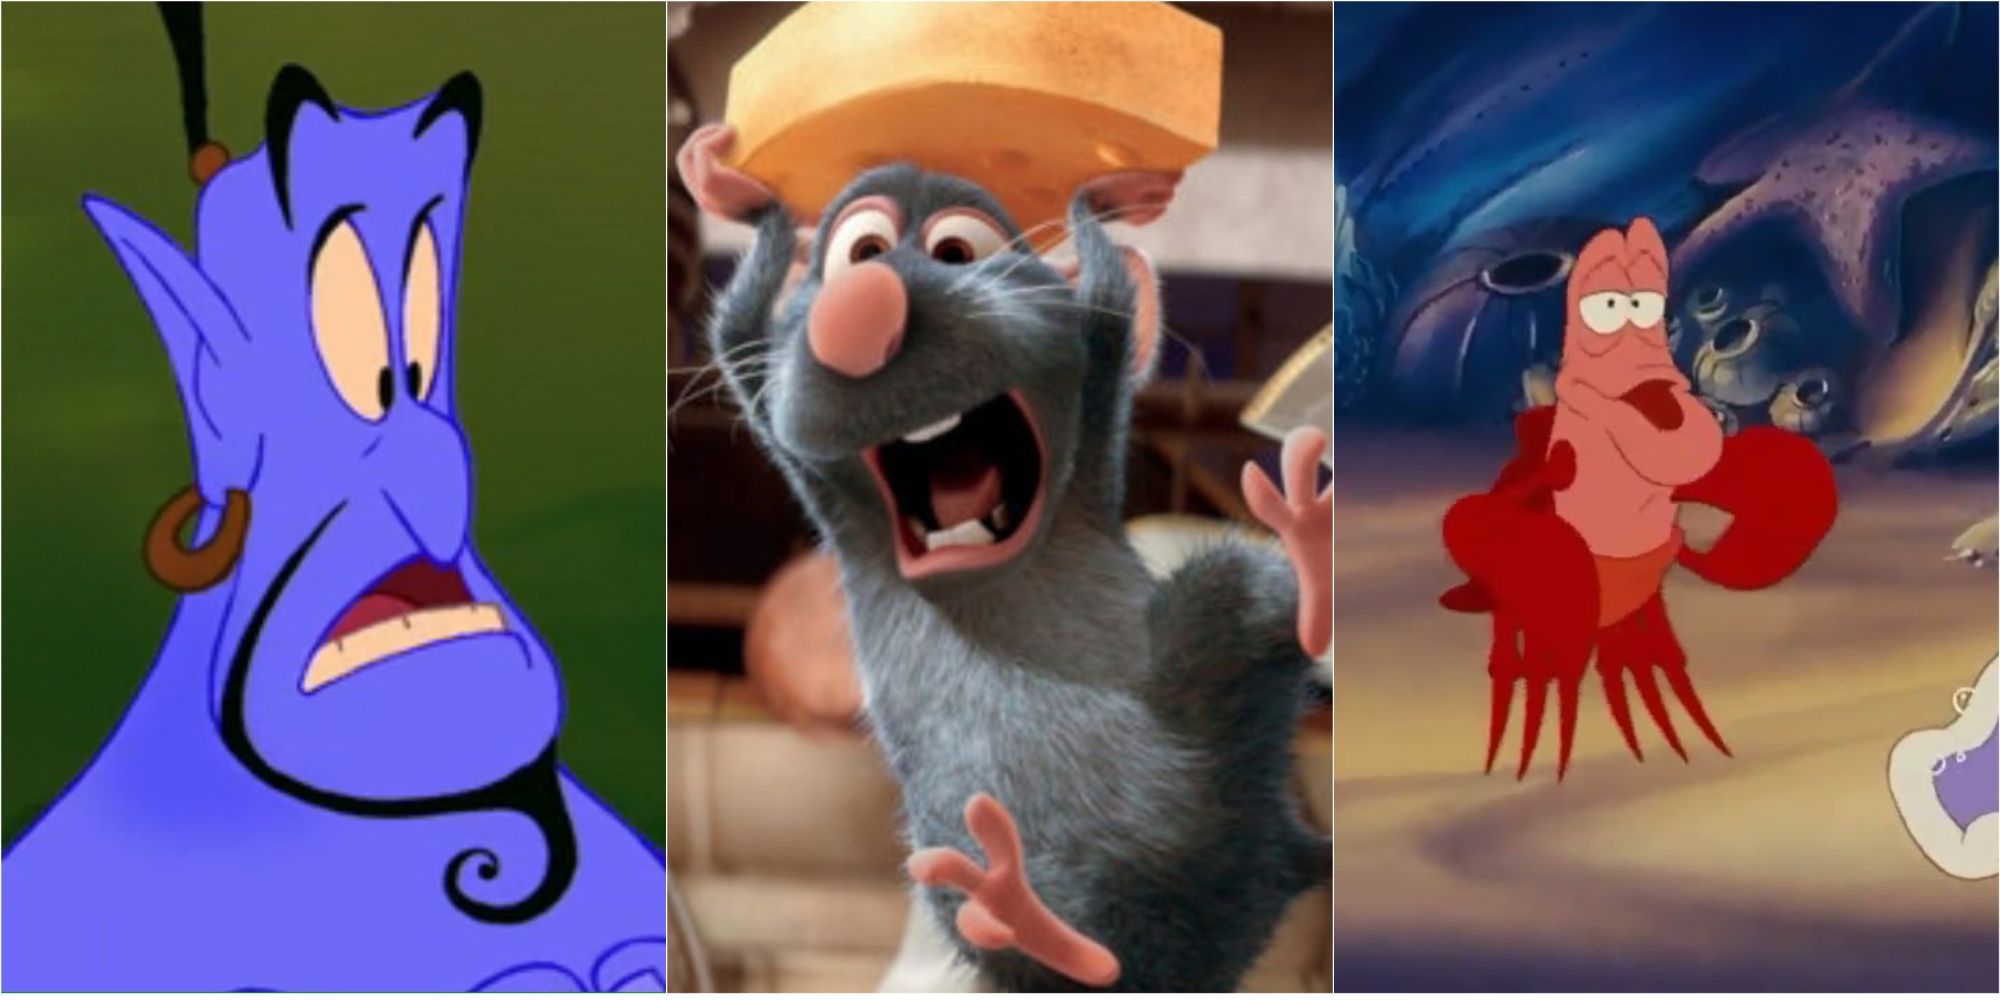 A feature image of Genie(Aladdin), Remy(Ratatouille), and Sebastian(The Little Mermaid)